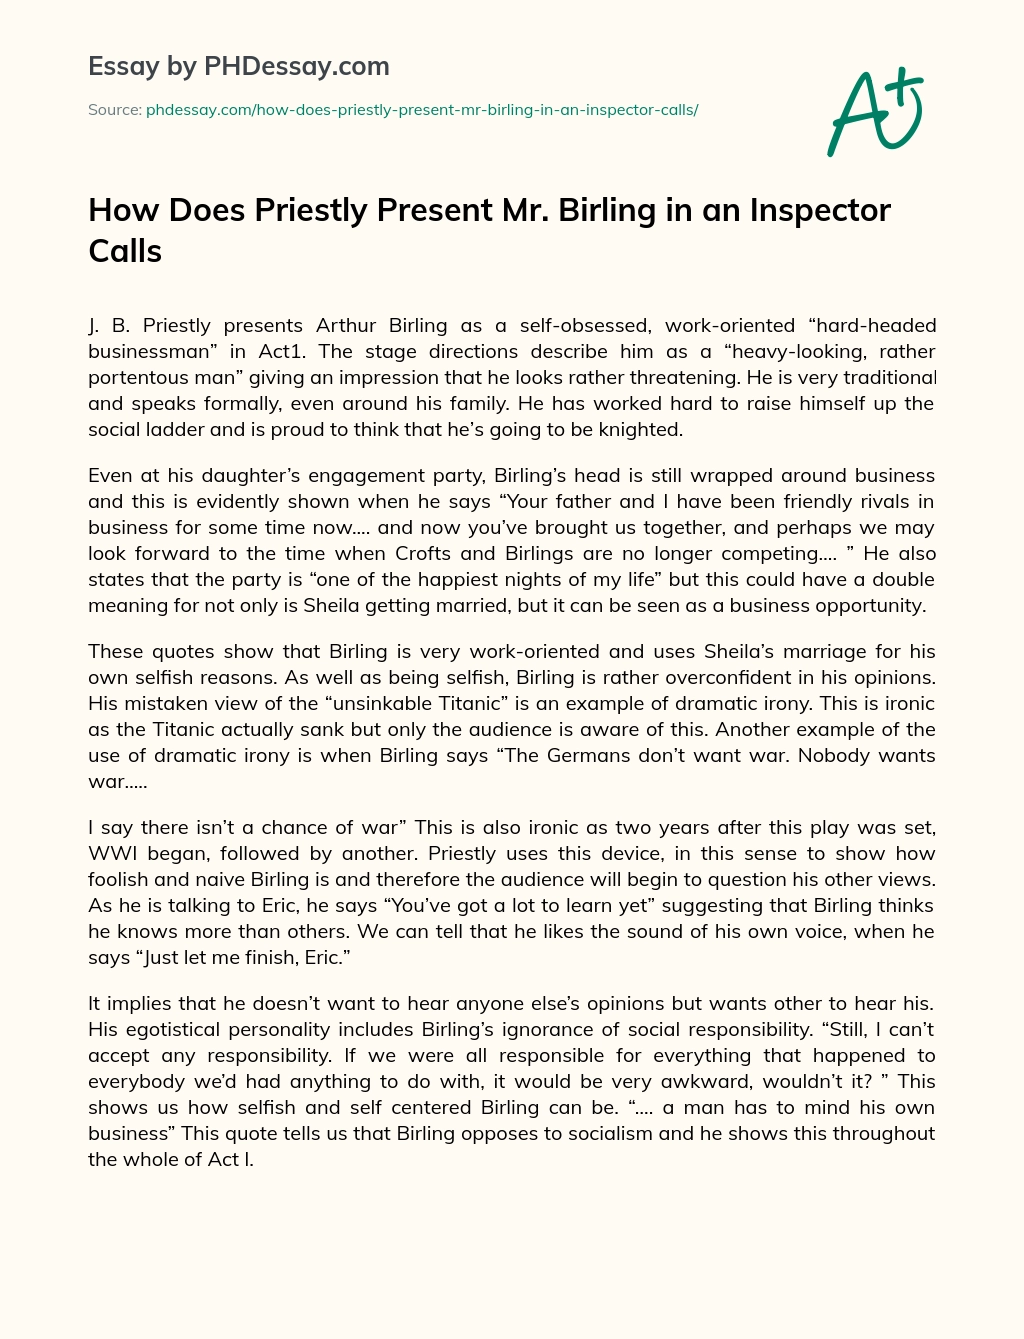 How Does Priestly Present Mr. Birling in an Inspector Calls essay